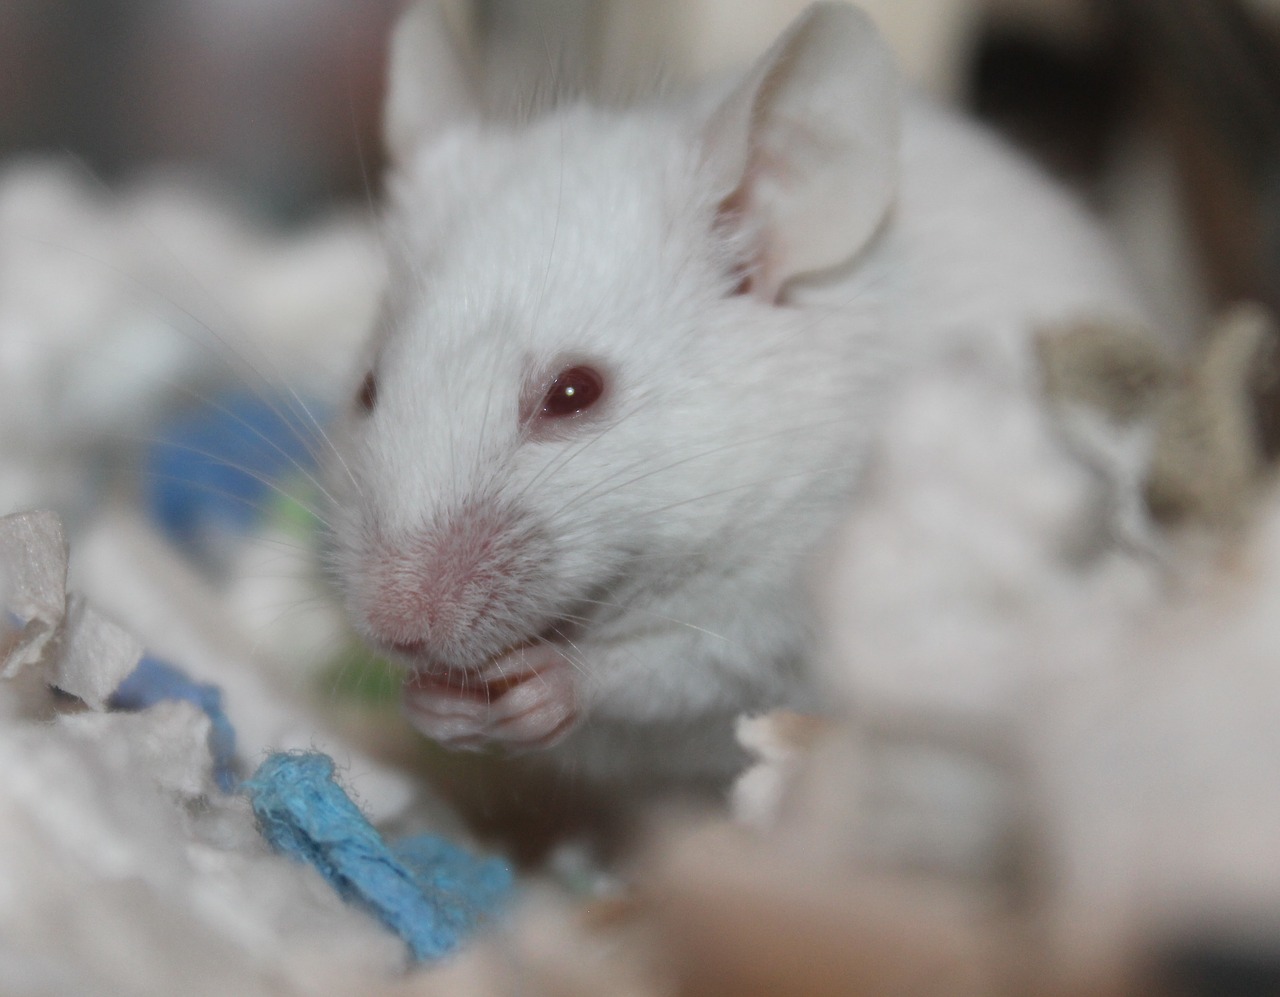 Experiments in Rats Show Some Bad Memories Can Be Forgotten